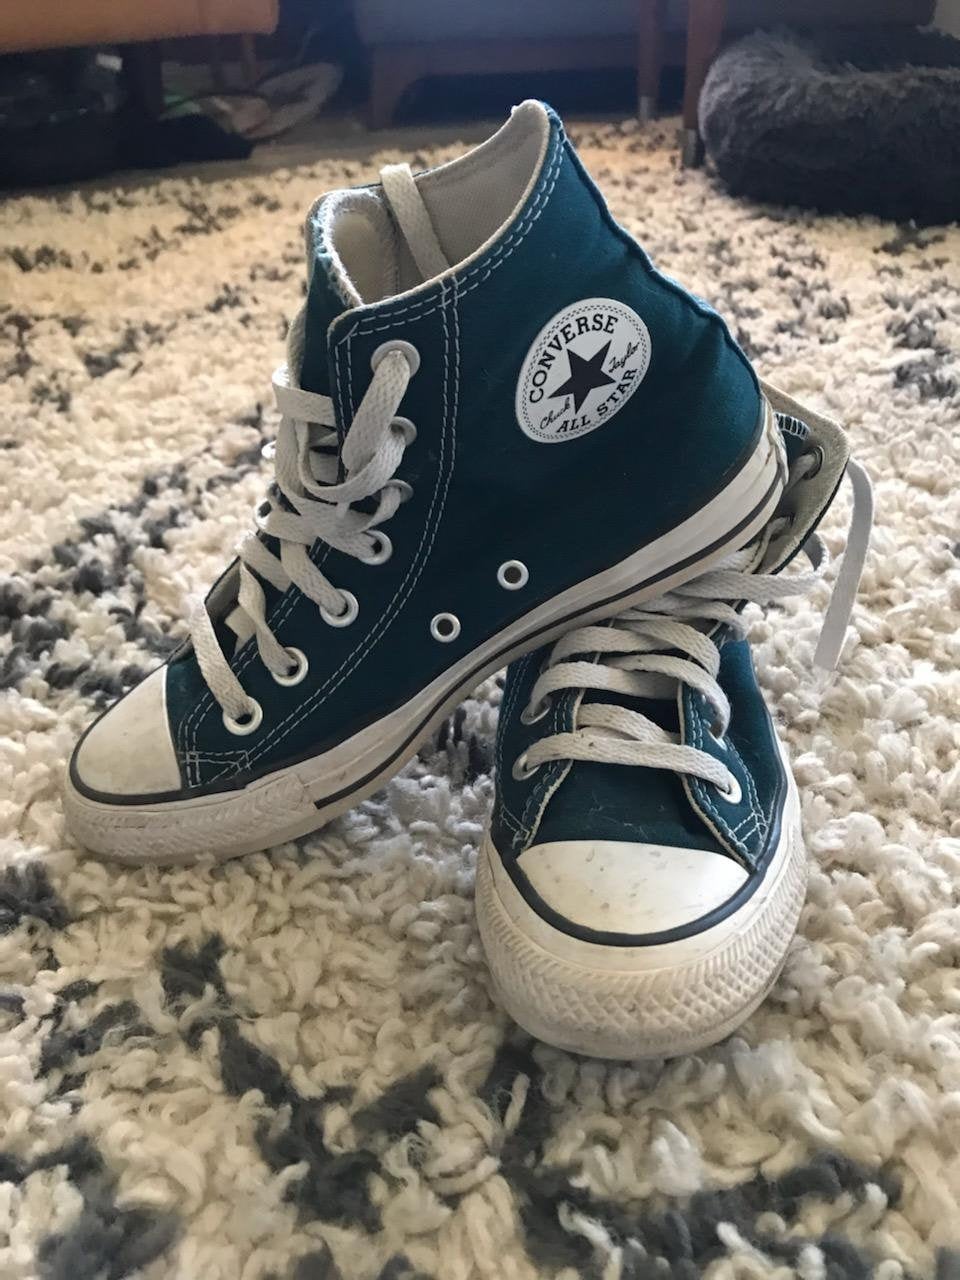 Peacock Teal Converse High Top Shoes Hightops Turquoise | Etsy